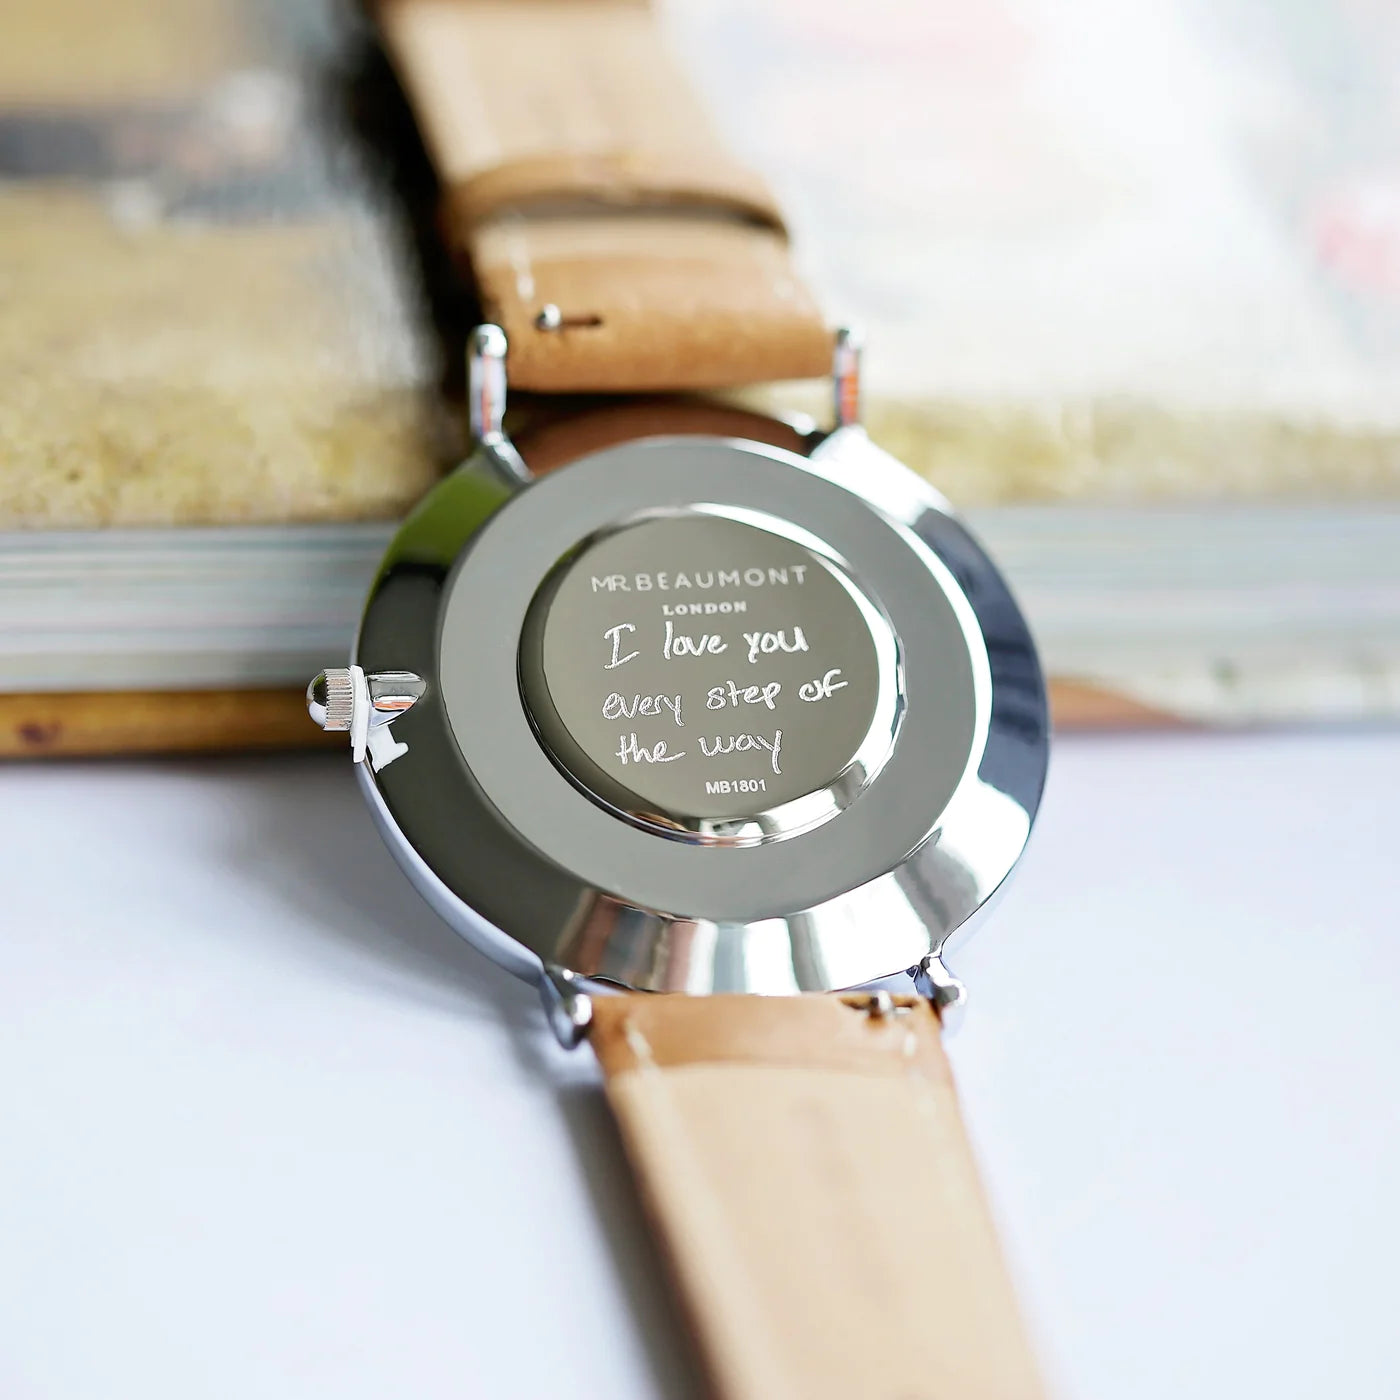 Image of a Mr Beaumont watch with a camel colour Nappa leather strap and a black face. The back of the watch can be engraved with your own handwritten message or drawing.